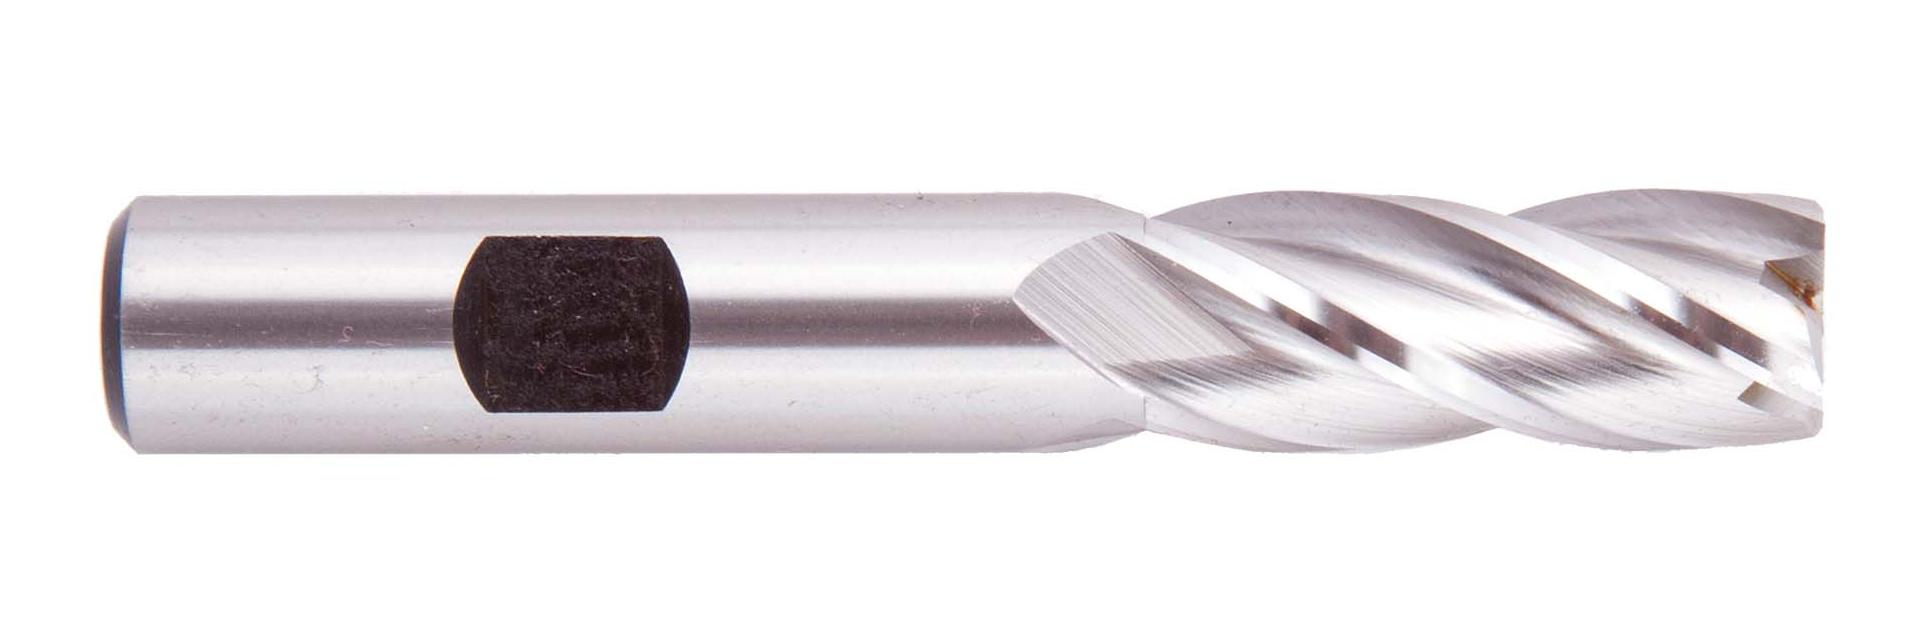 Cleveland C39733 HG-3 High Speed Steel Single End 3-Flute Center Cutting Finisher End Mill 